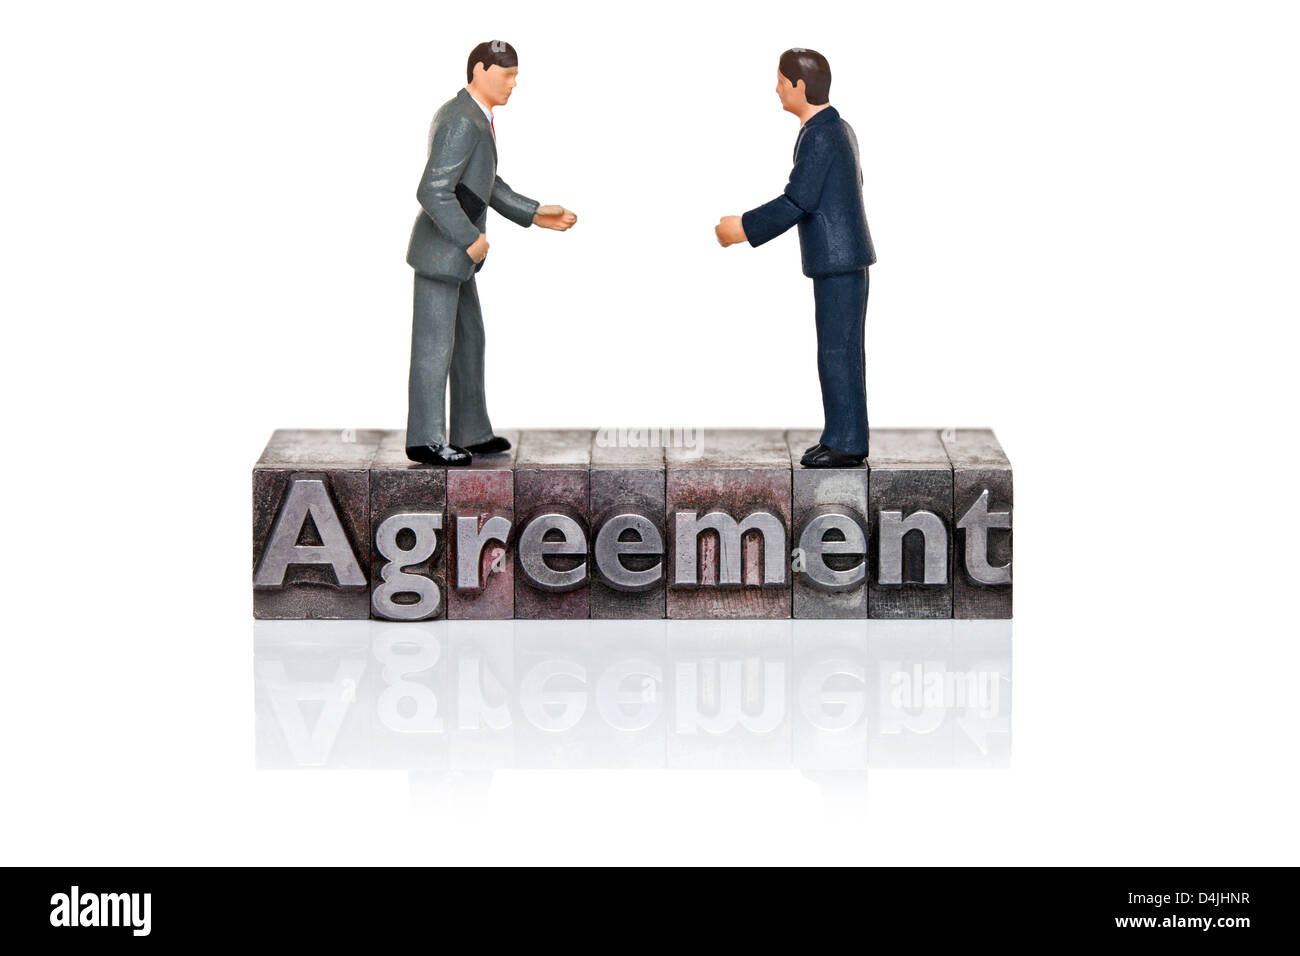 Hand painted businessmen figurines and the word Agreement in old metal letterpress isolated on a white background. Stock Photo